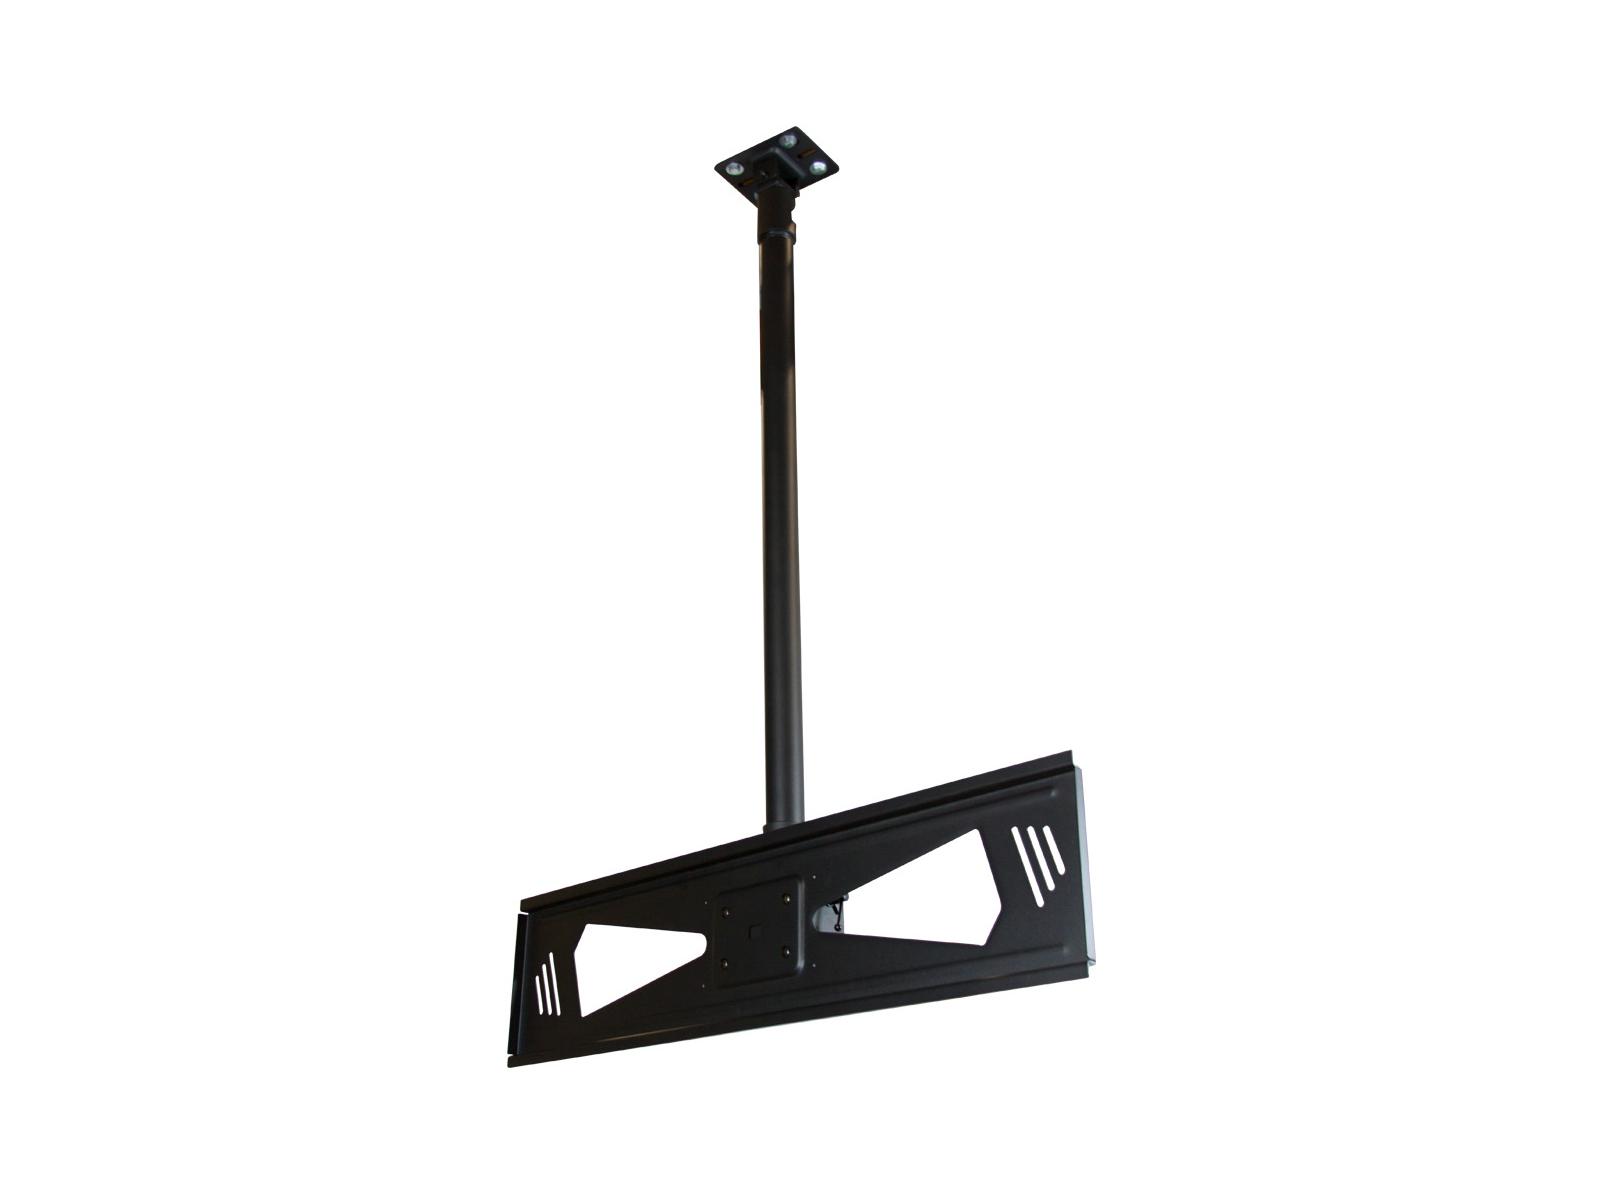 VZ-CMKiT-04 Universal Ceiling Mount Kit for 37 inch to 70 inch CCTV and Vdeo Wall Monitors by ViewZ